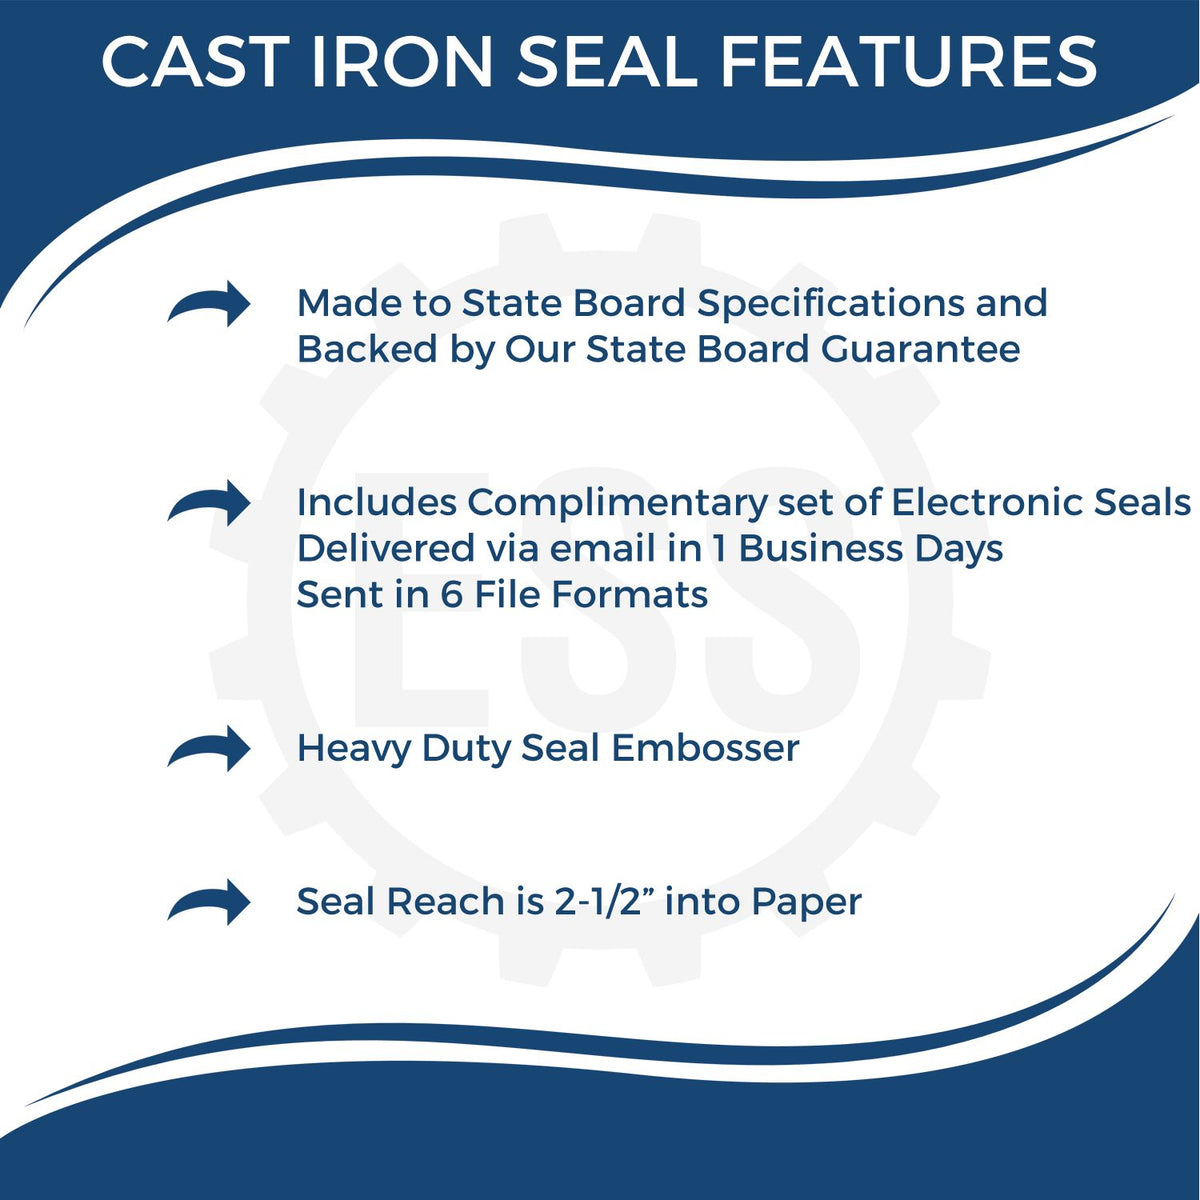 A picture of an infographic highlighting the selling points for the Heavy Duty Cast Iron New Hampshire Geologist Seal Embosser